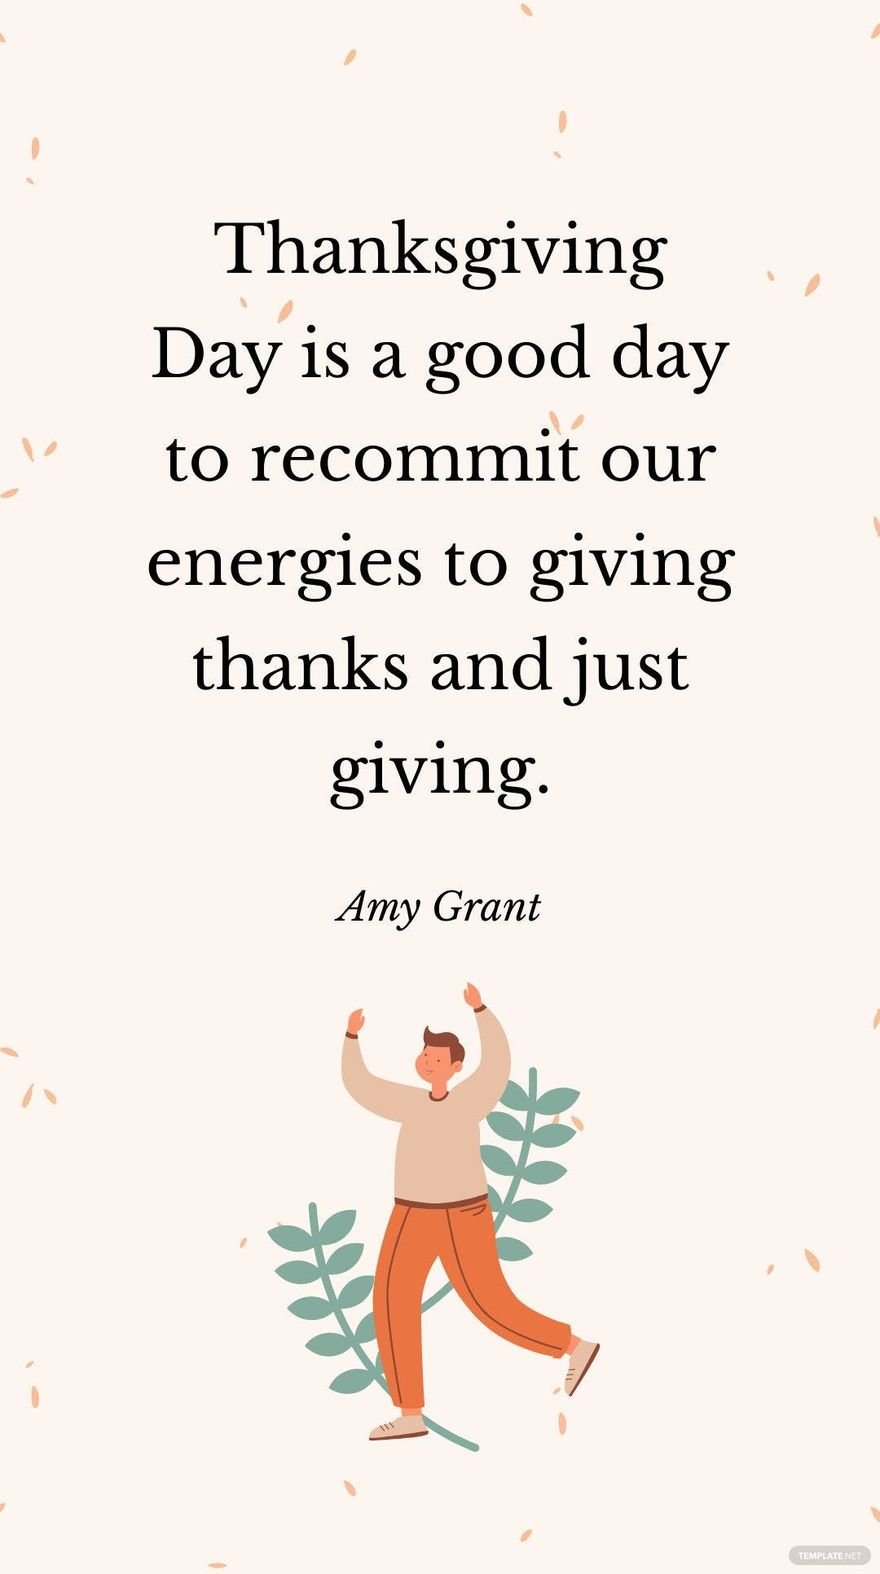 Amy Grant - Thanksgiving Day is a good day to recommit our energies to giving thanks and just giving. in JPG